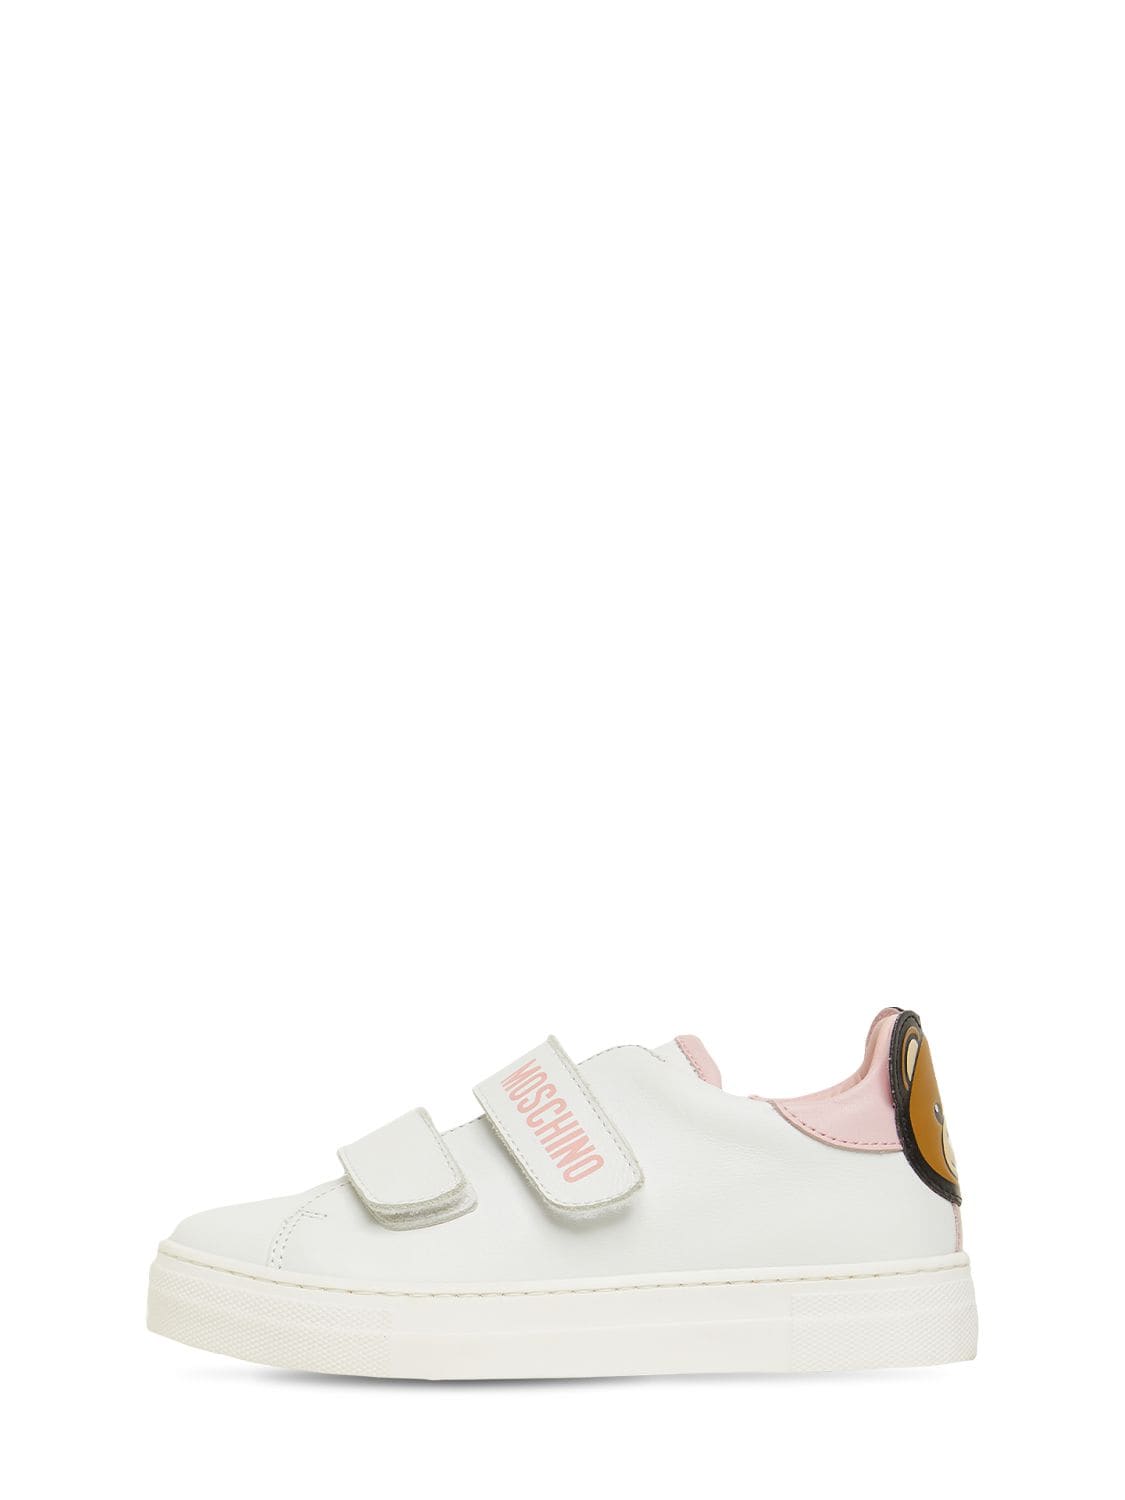 MOSCHINO LOGO LEATHER STRAP SNEAKERS W/ PATCH